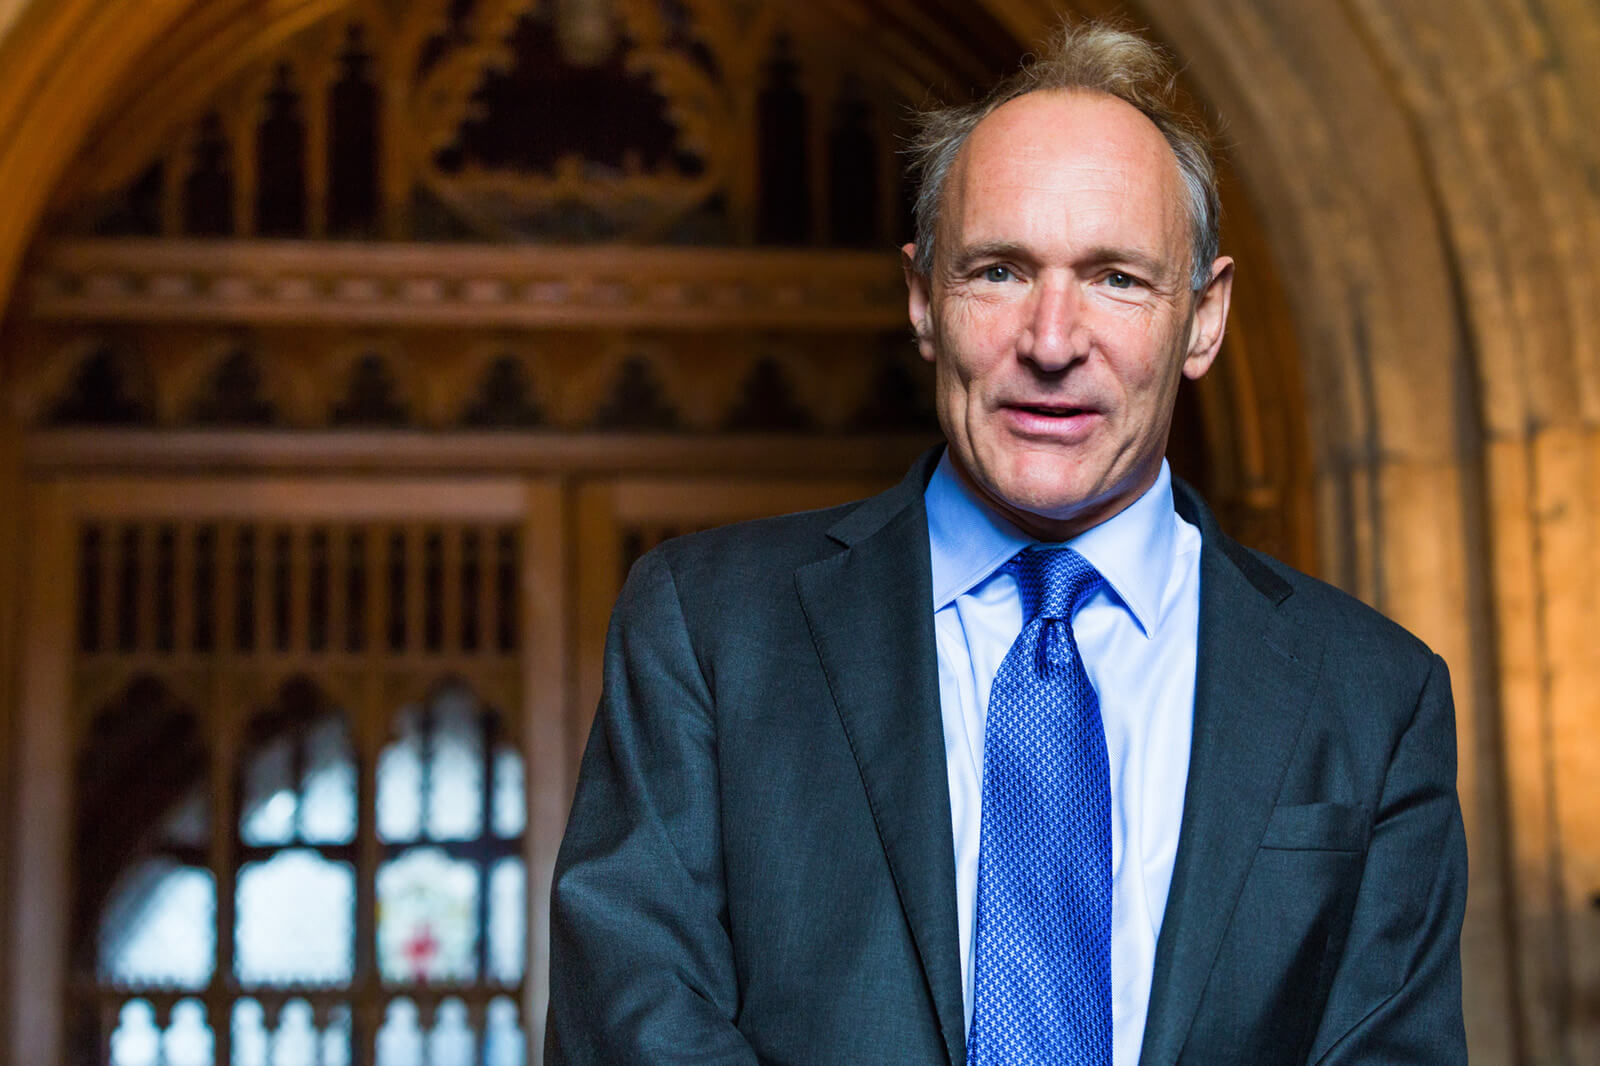 Tim Berners-Lee is auctioning off the web's original source code as an NFT